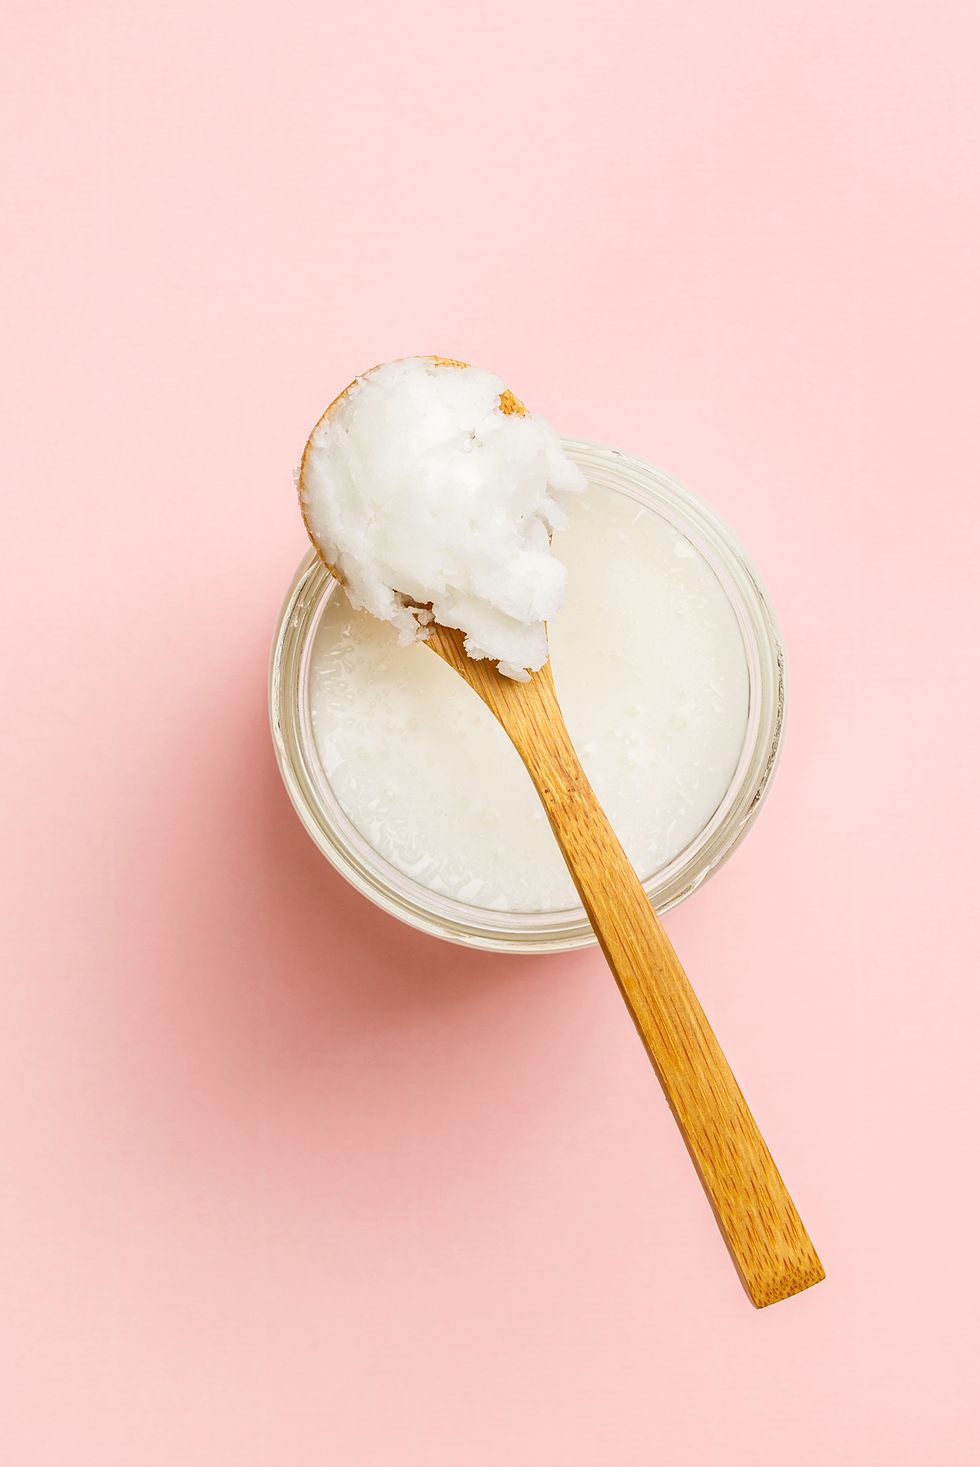 Feeling Fresh With The DIY Coconut Oil Hair Conditioner